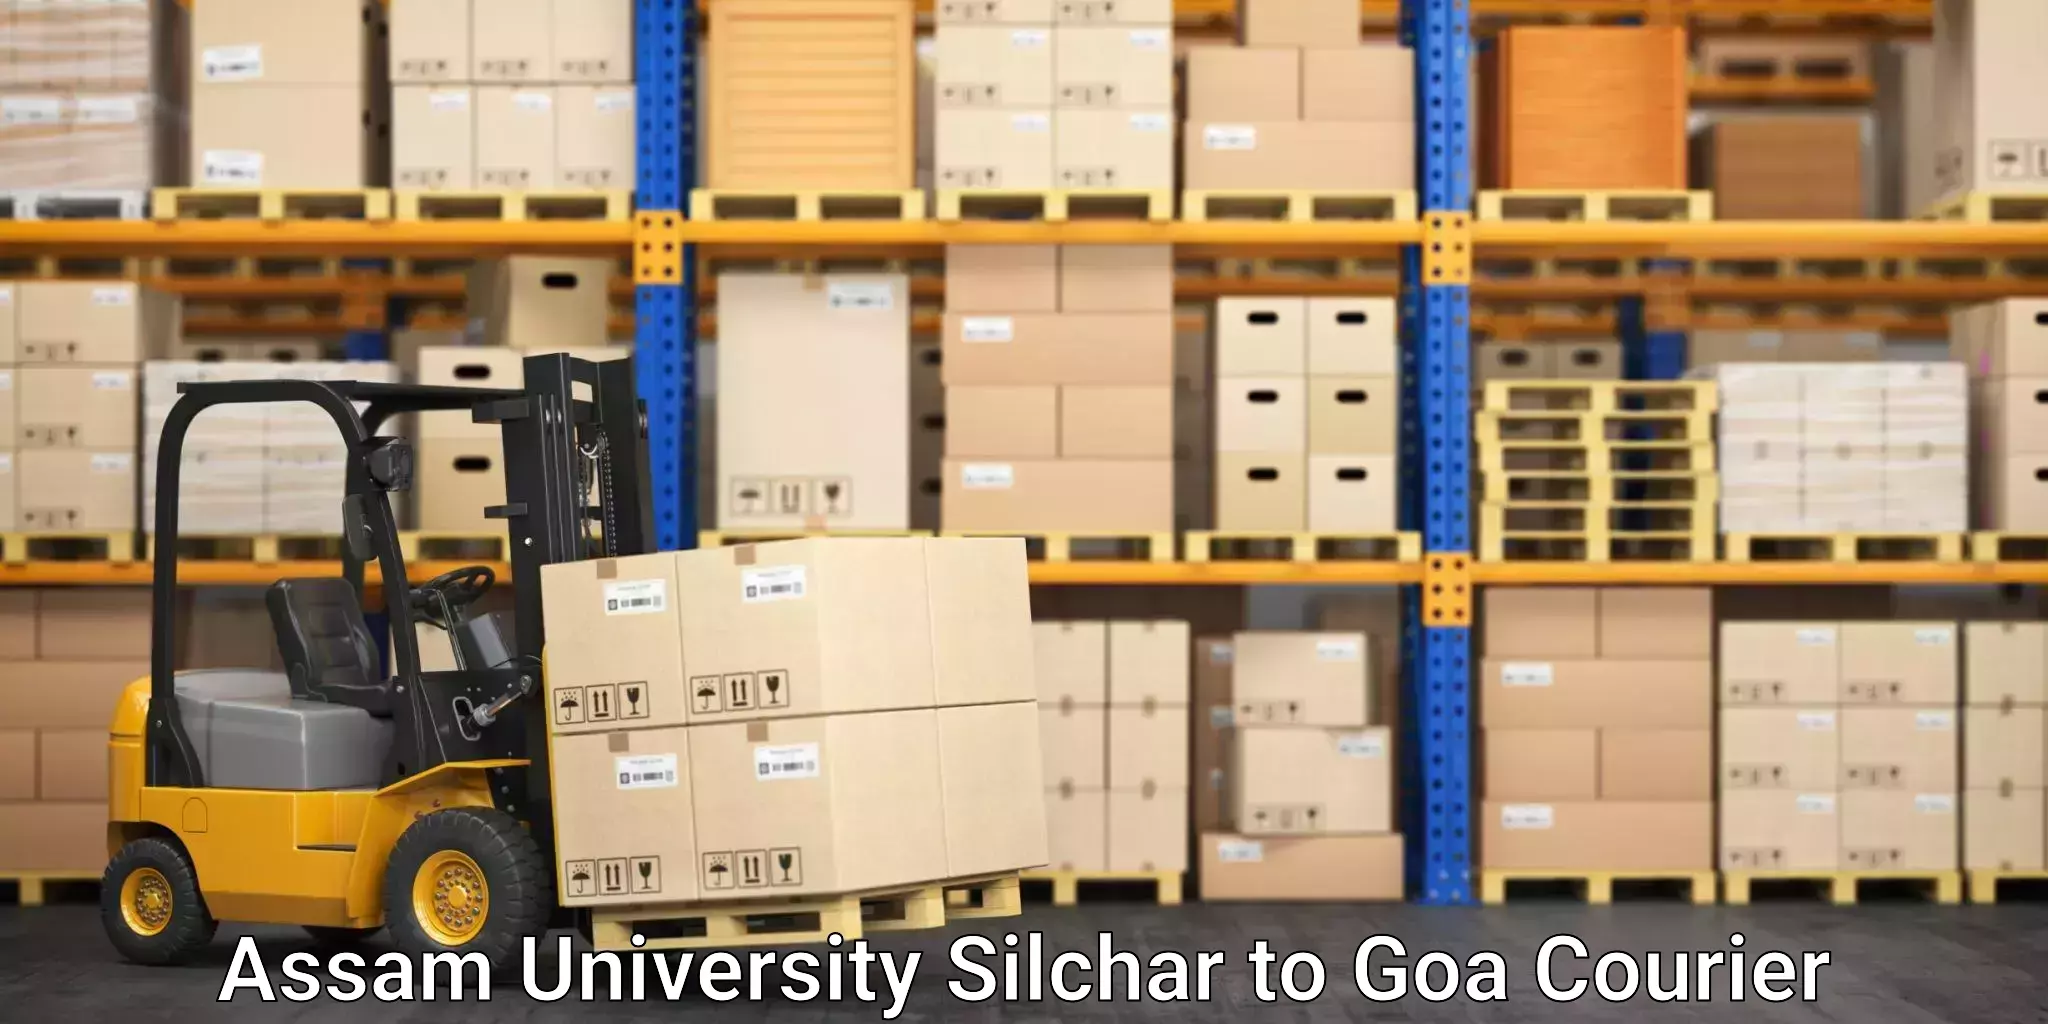 Multi-national courier services Assam University Silchar to Panaji